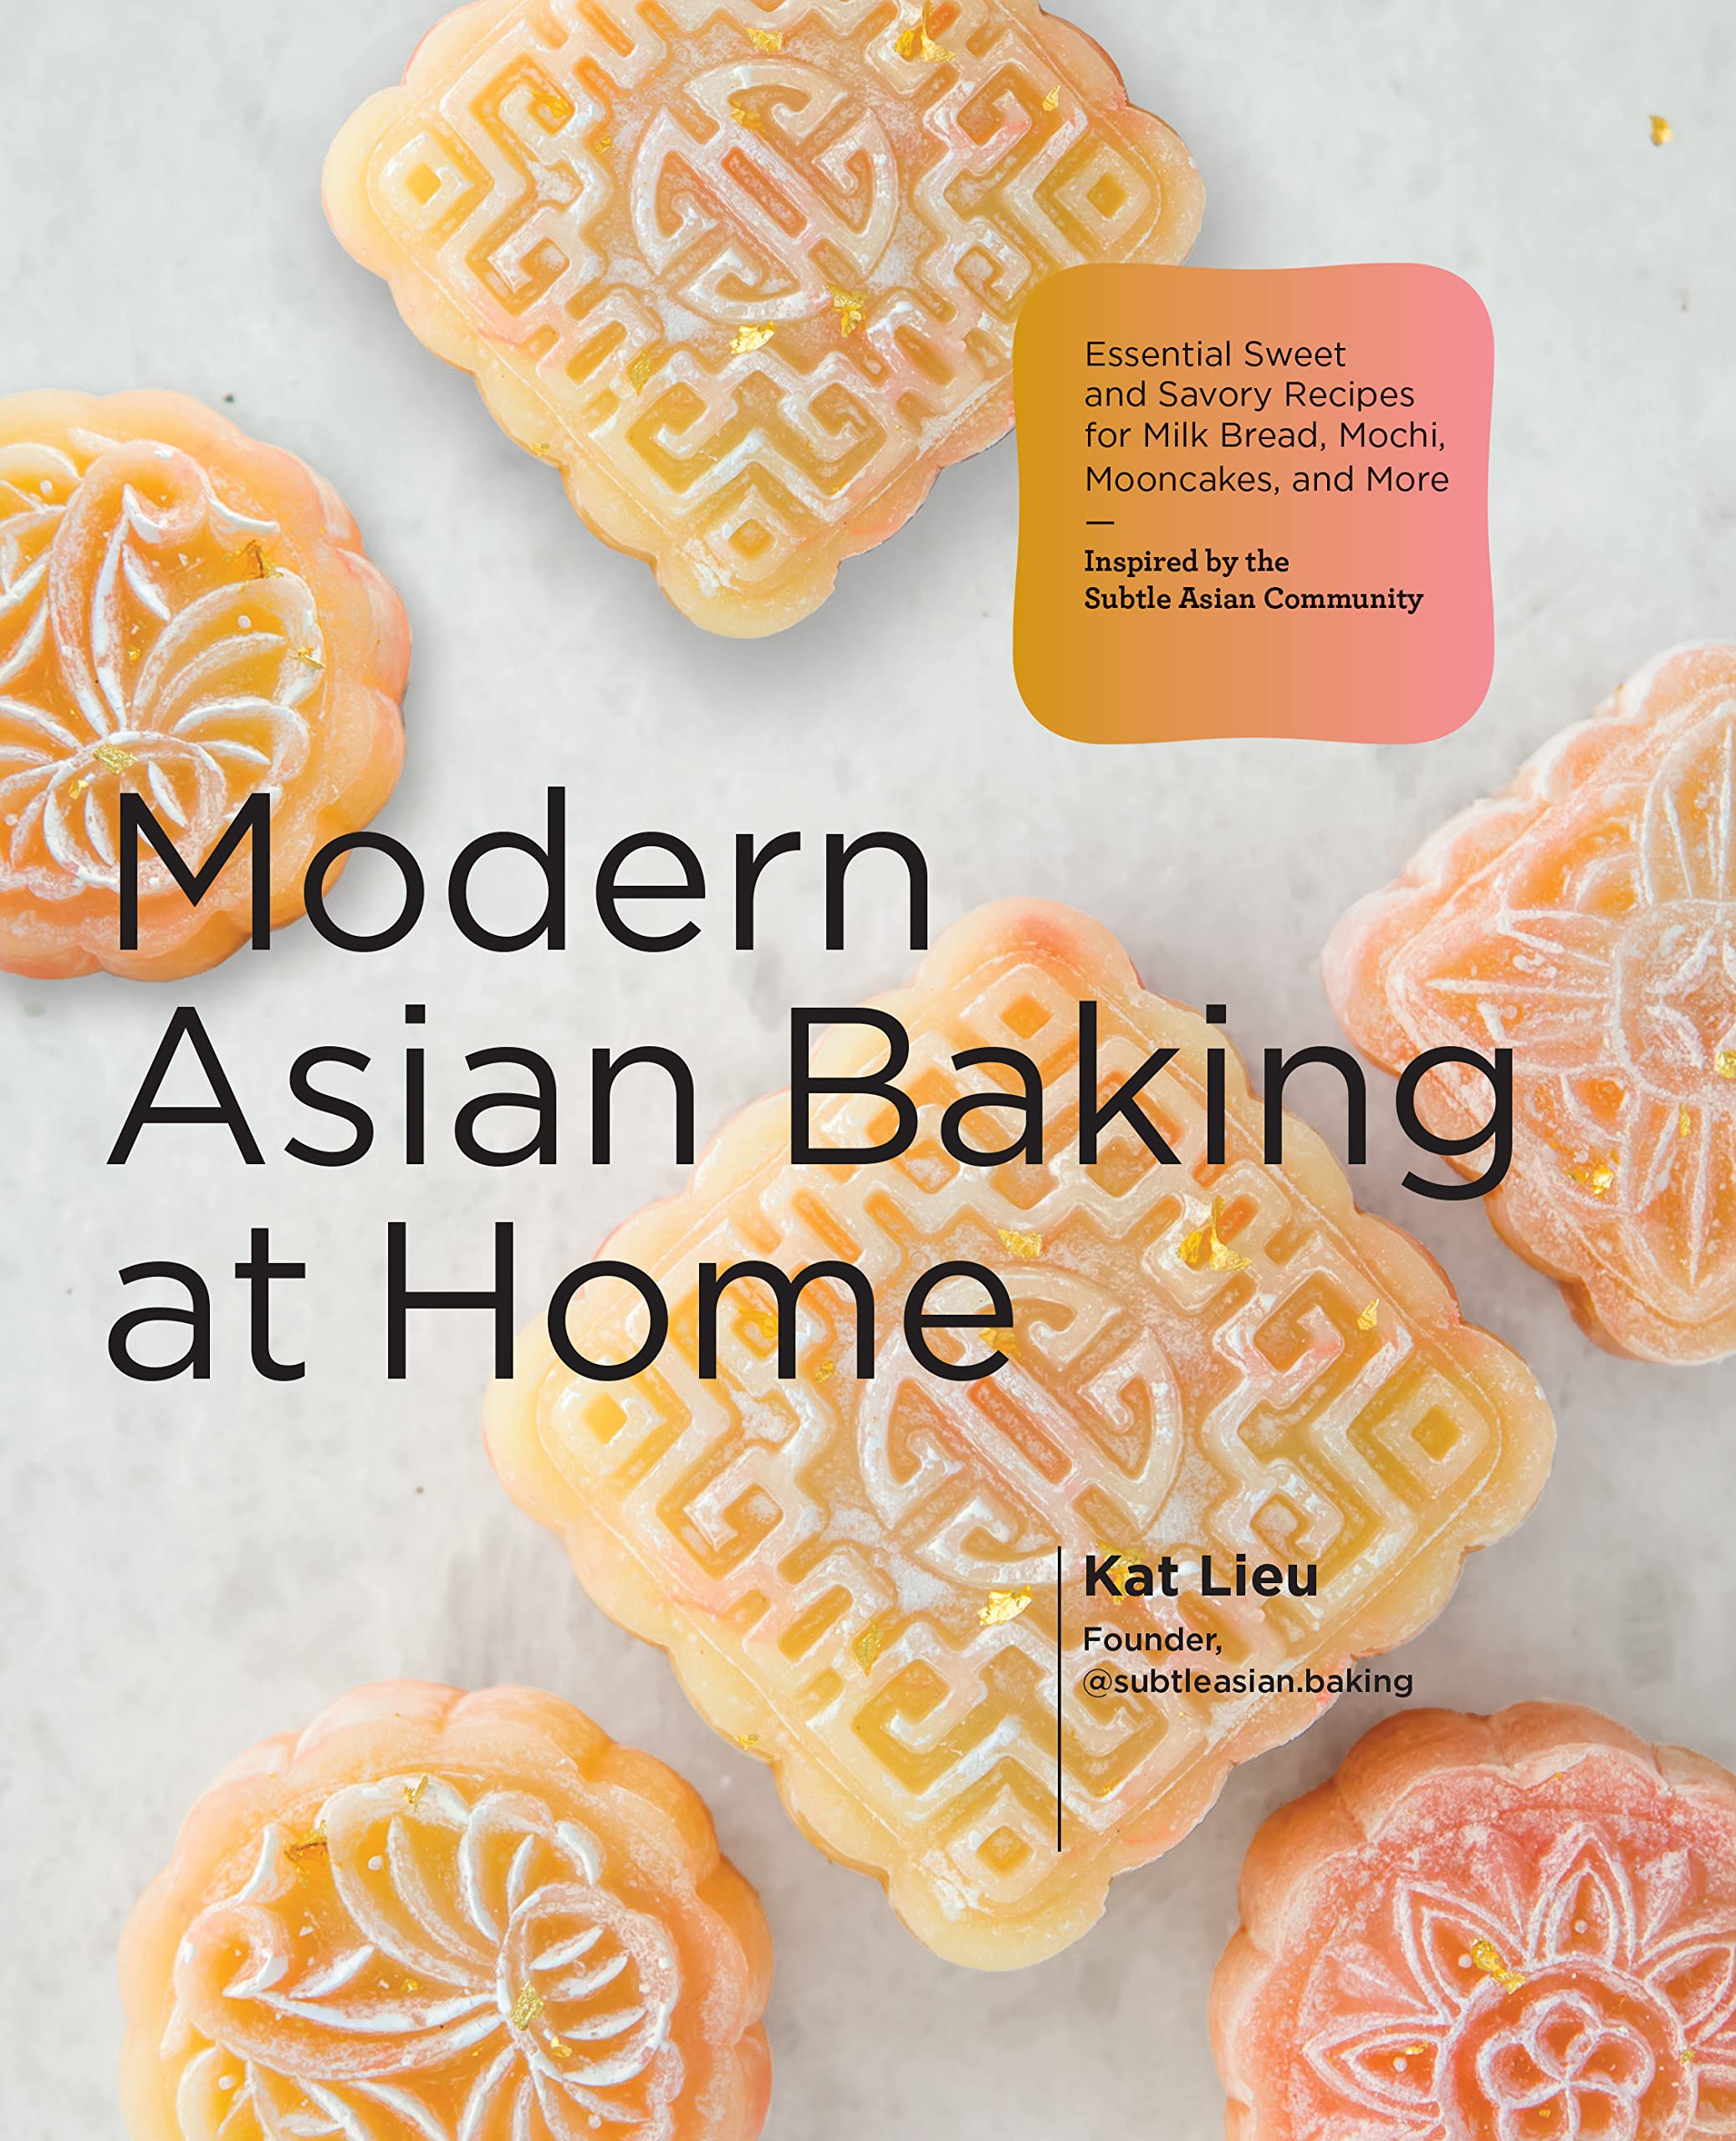 Modern Asian Baking at Home: Essential Sweet and Savory Recipes for Milk Bread, Mooncakes, Mochi, and More; Inspired by the Subtle Asian Baking Community (Kat Lieu)